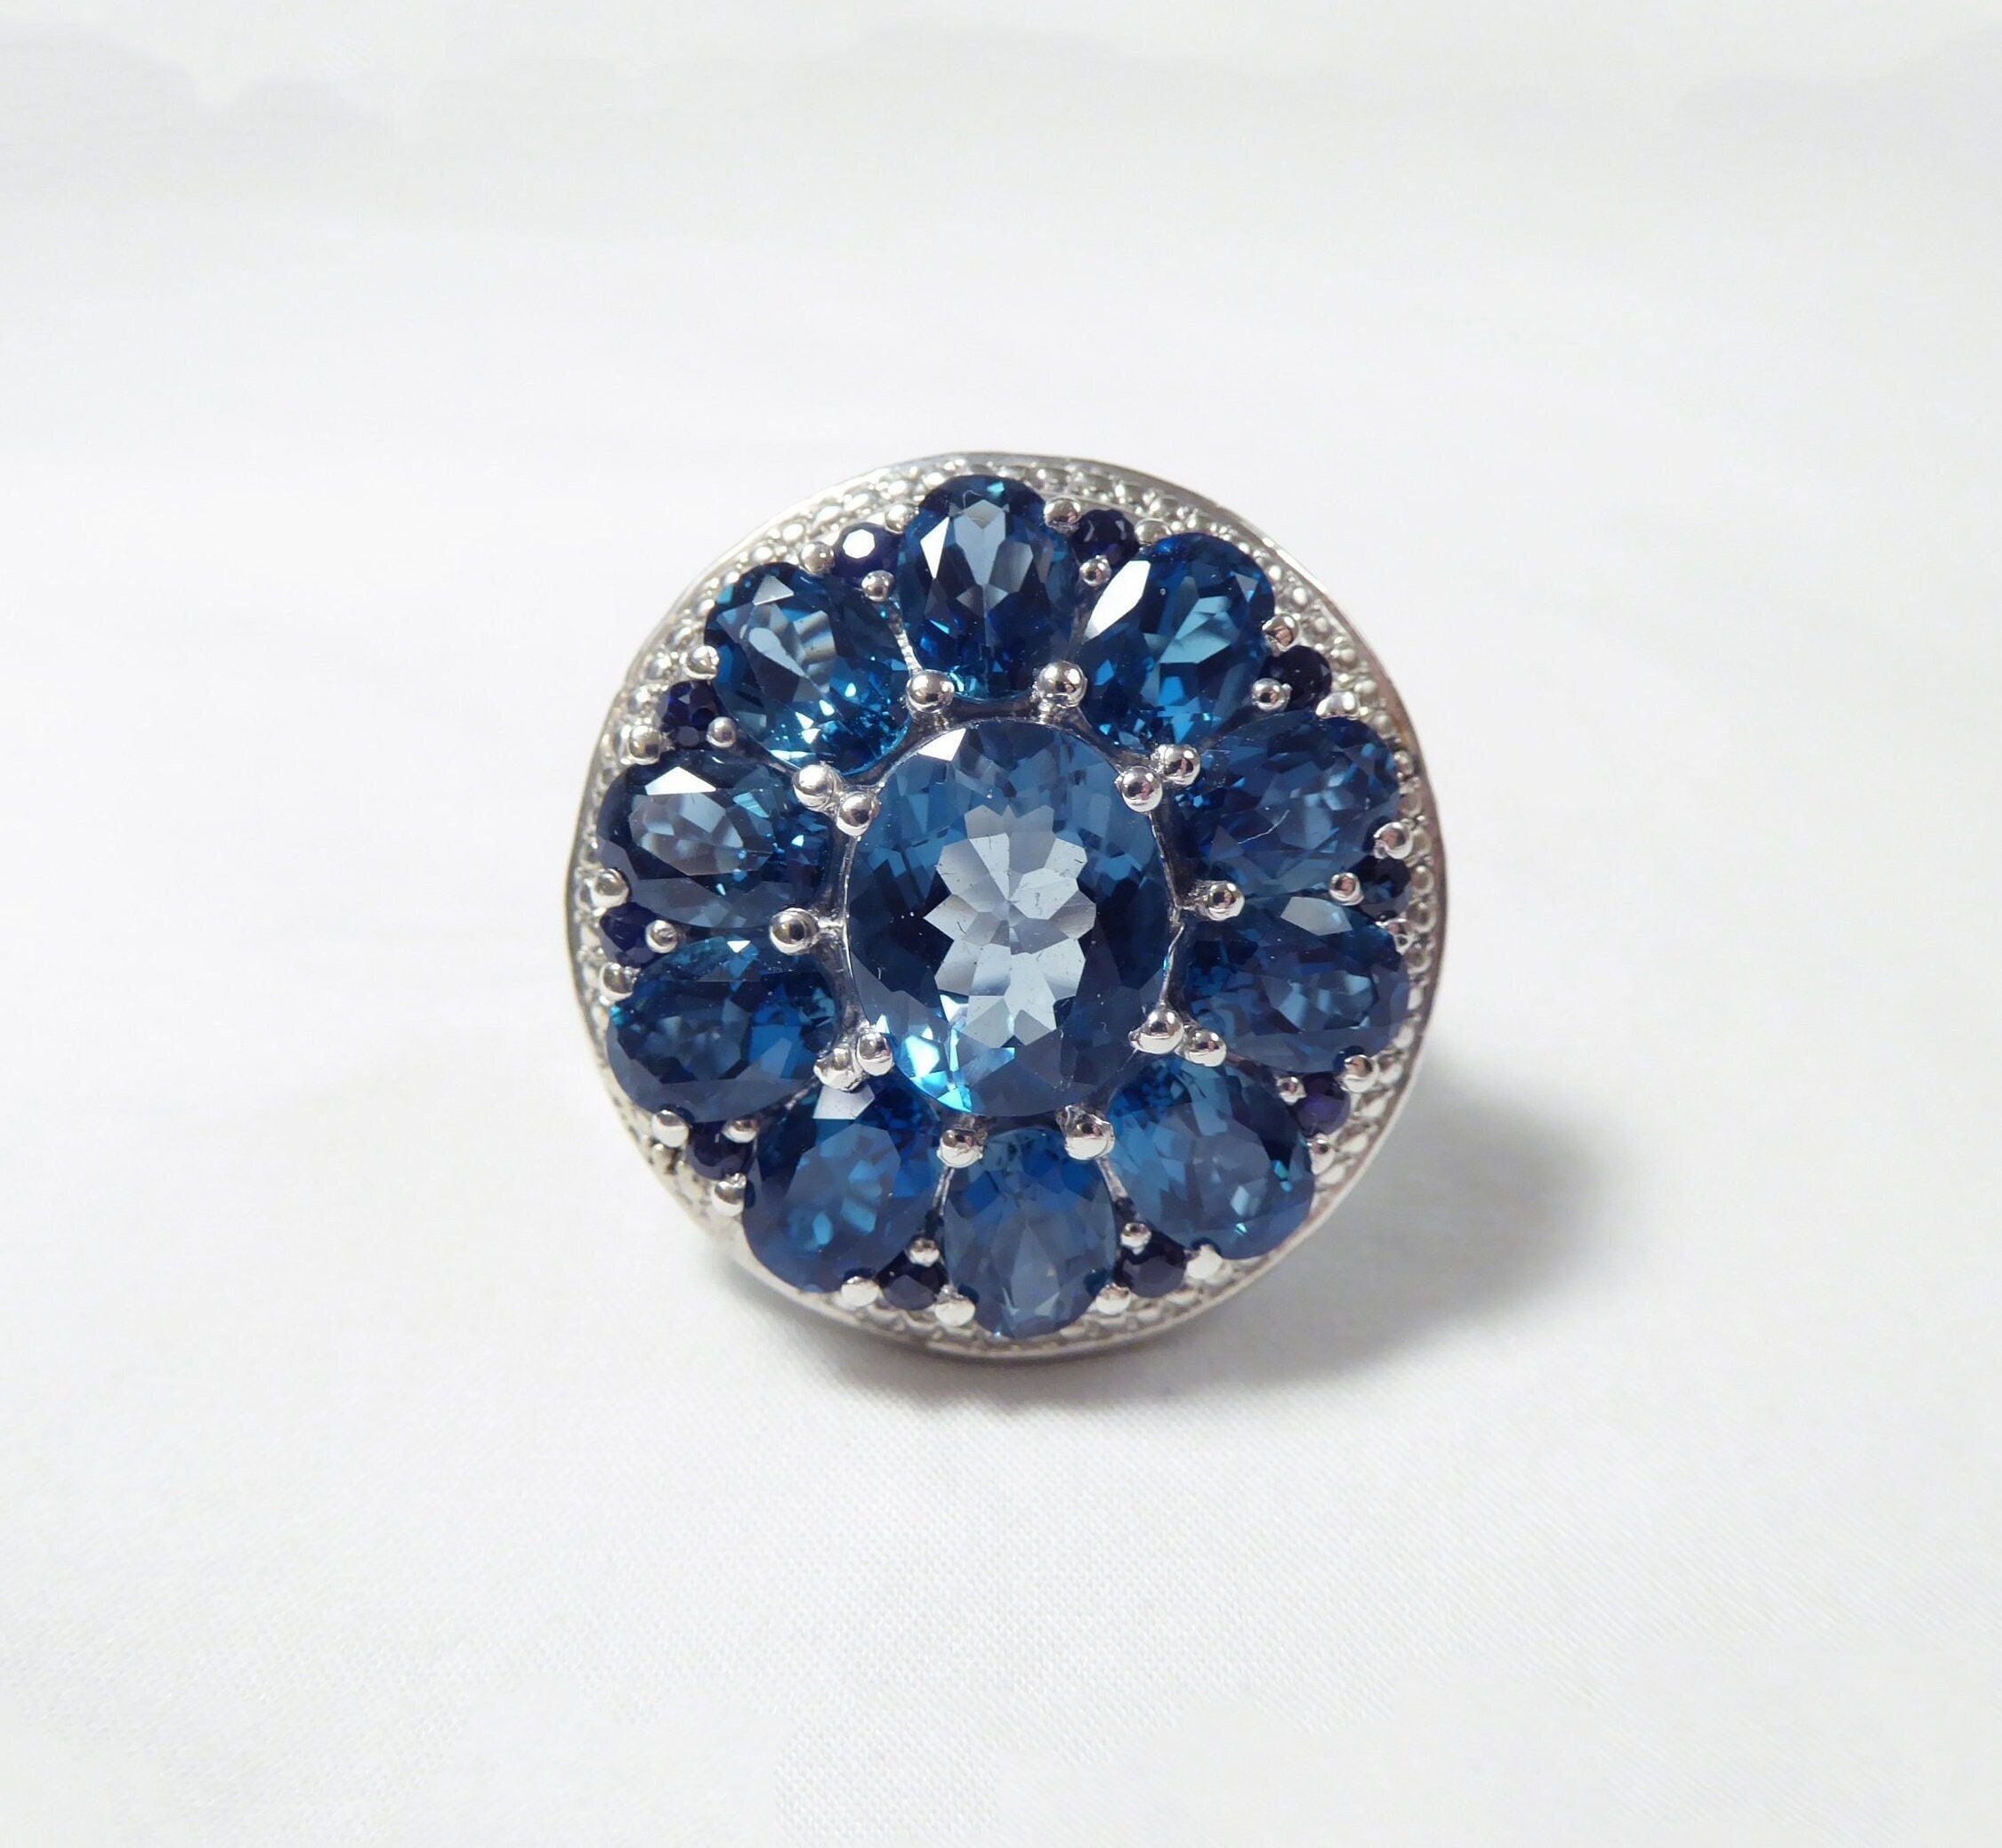 ON SALE! Natural London Blue Topaz and Blue Sapphire Flower Ring, 925 Sterling Silver, Size 8thumbnail